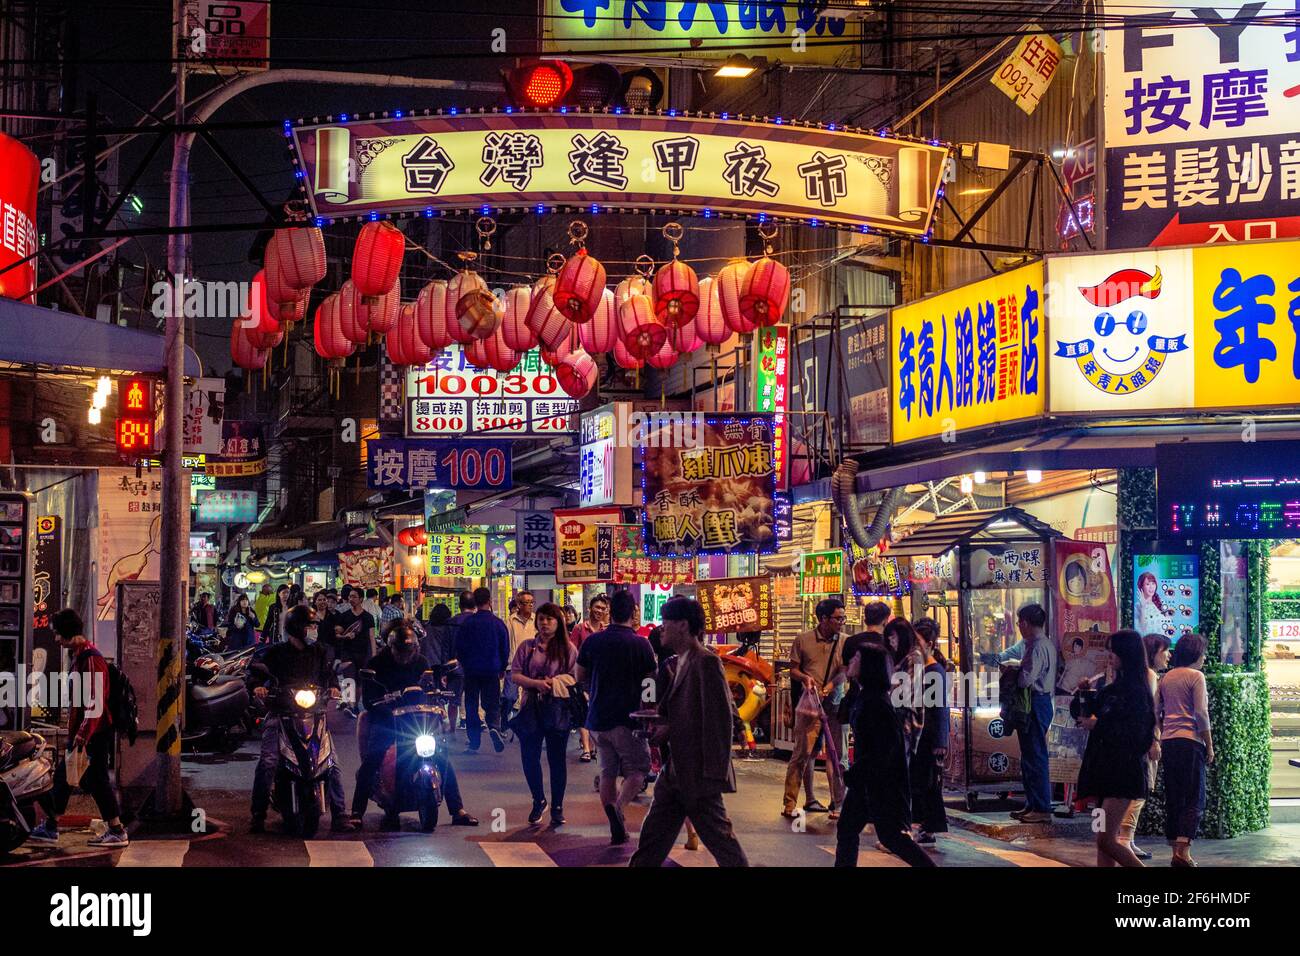 A Busy Night at the Fengjia Night Market in Taiwan, Stock Photo